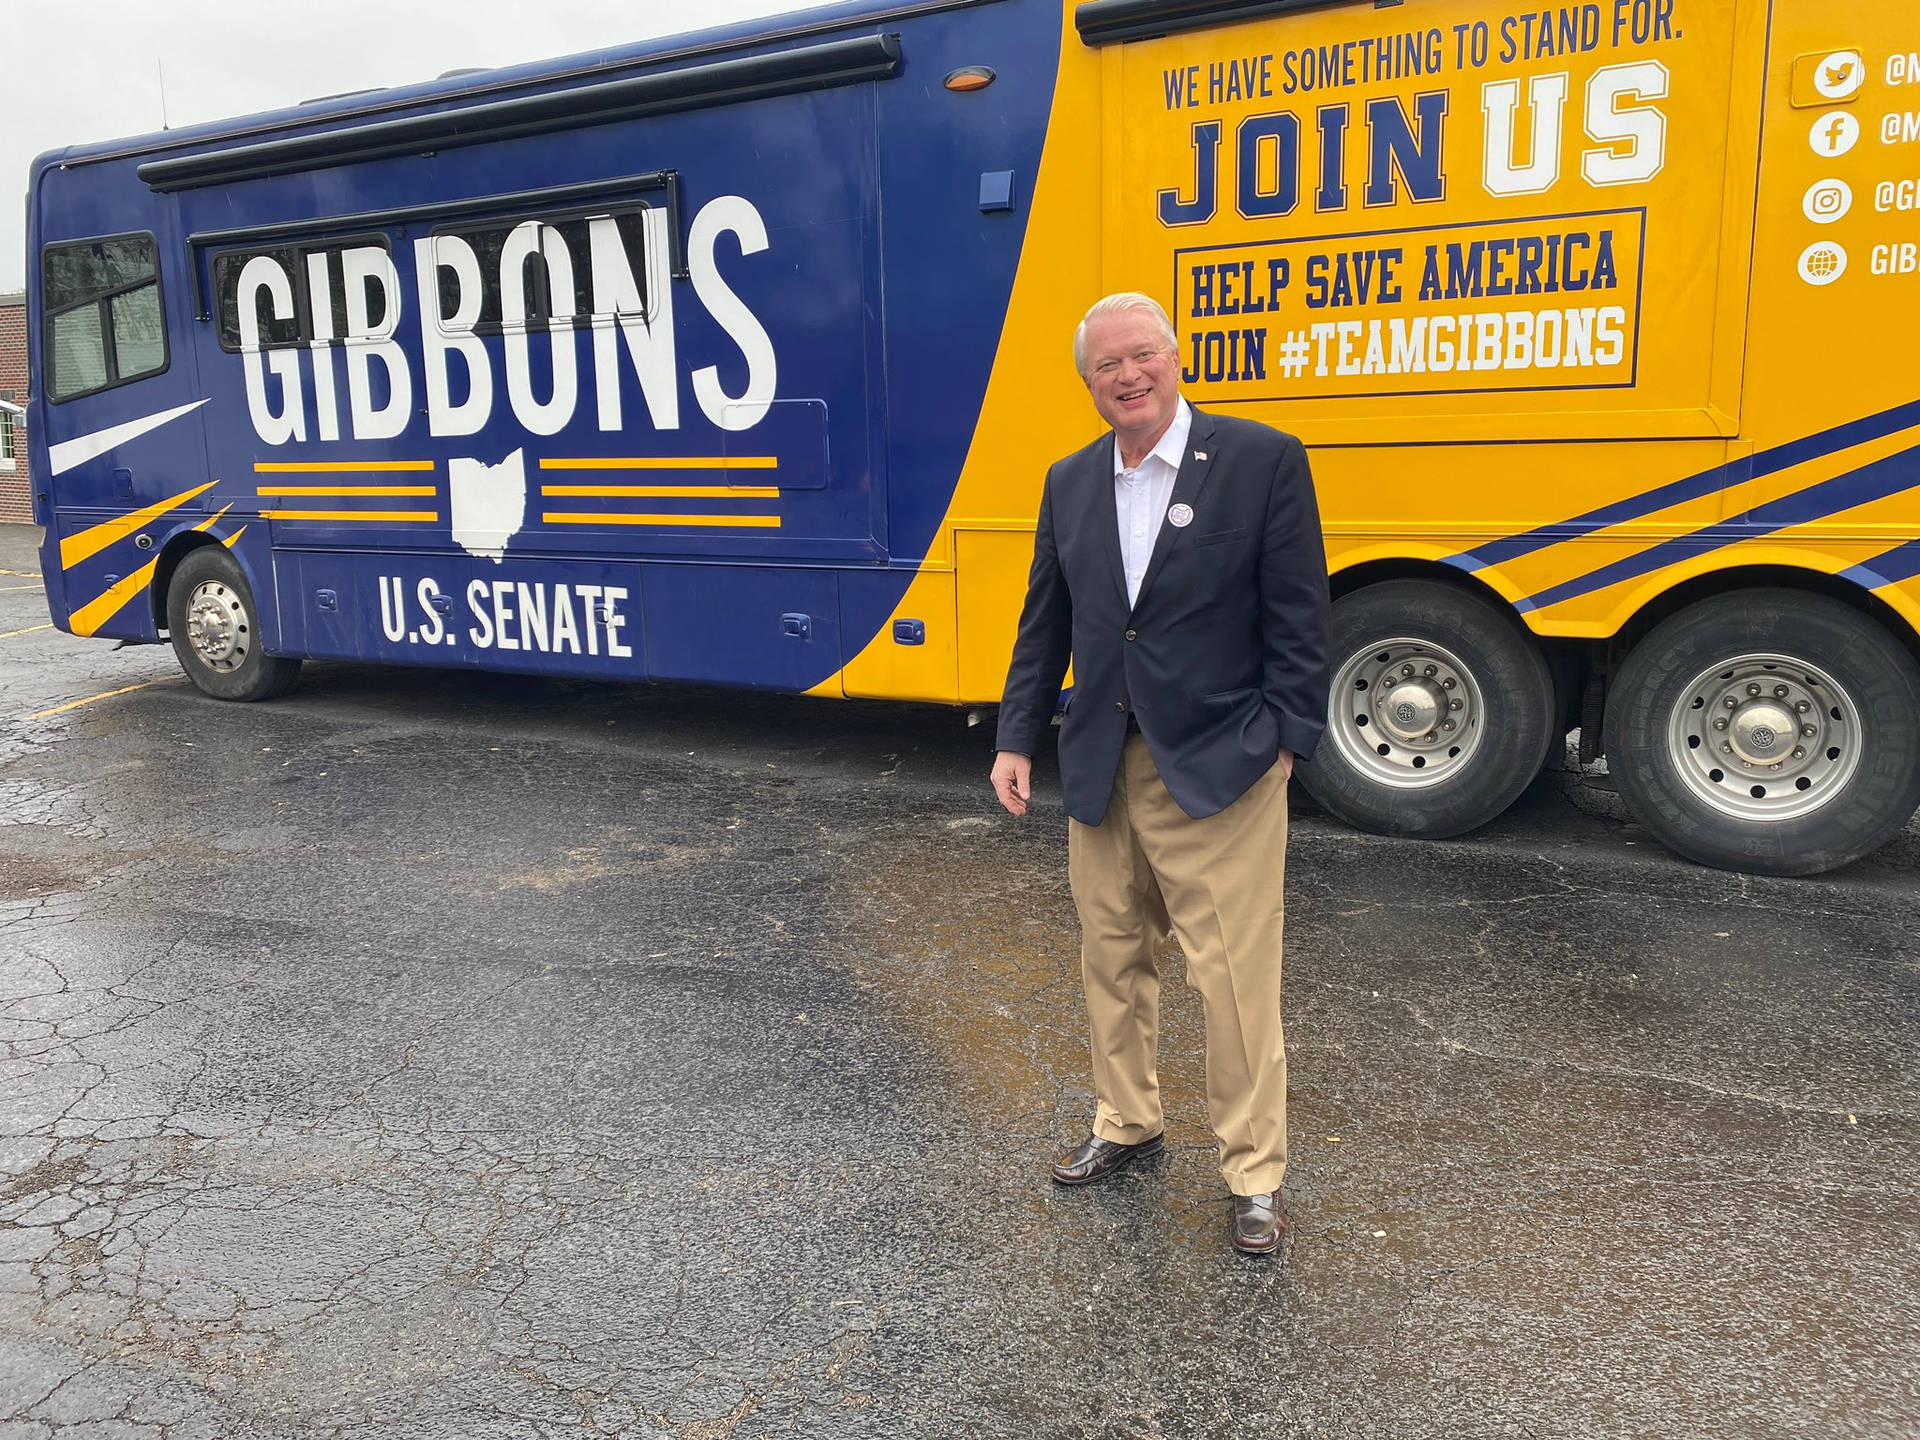 Solo Picture Of Mike Gibbons With Bus Picture